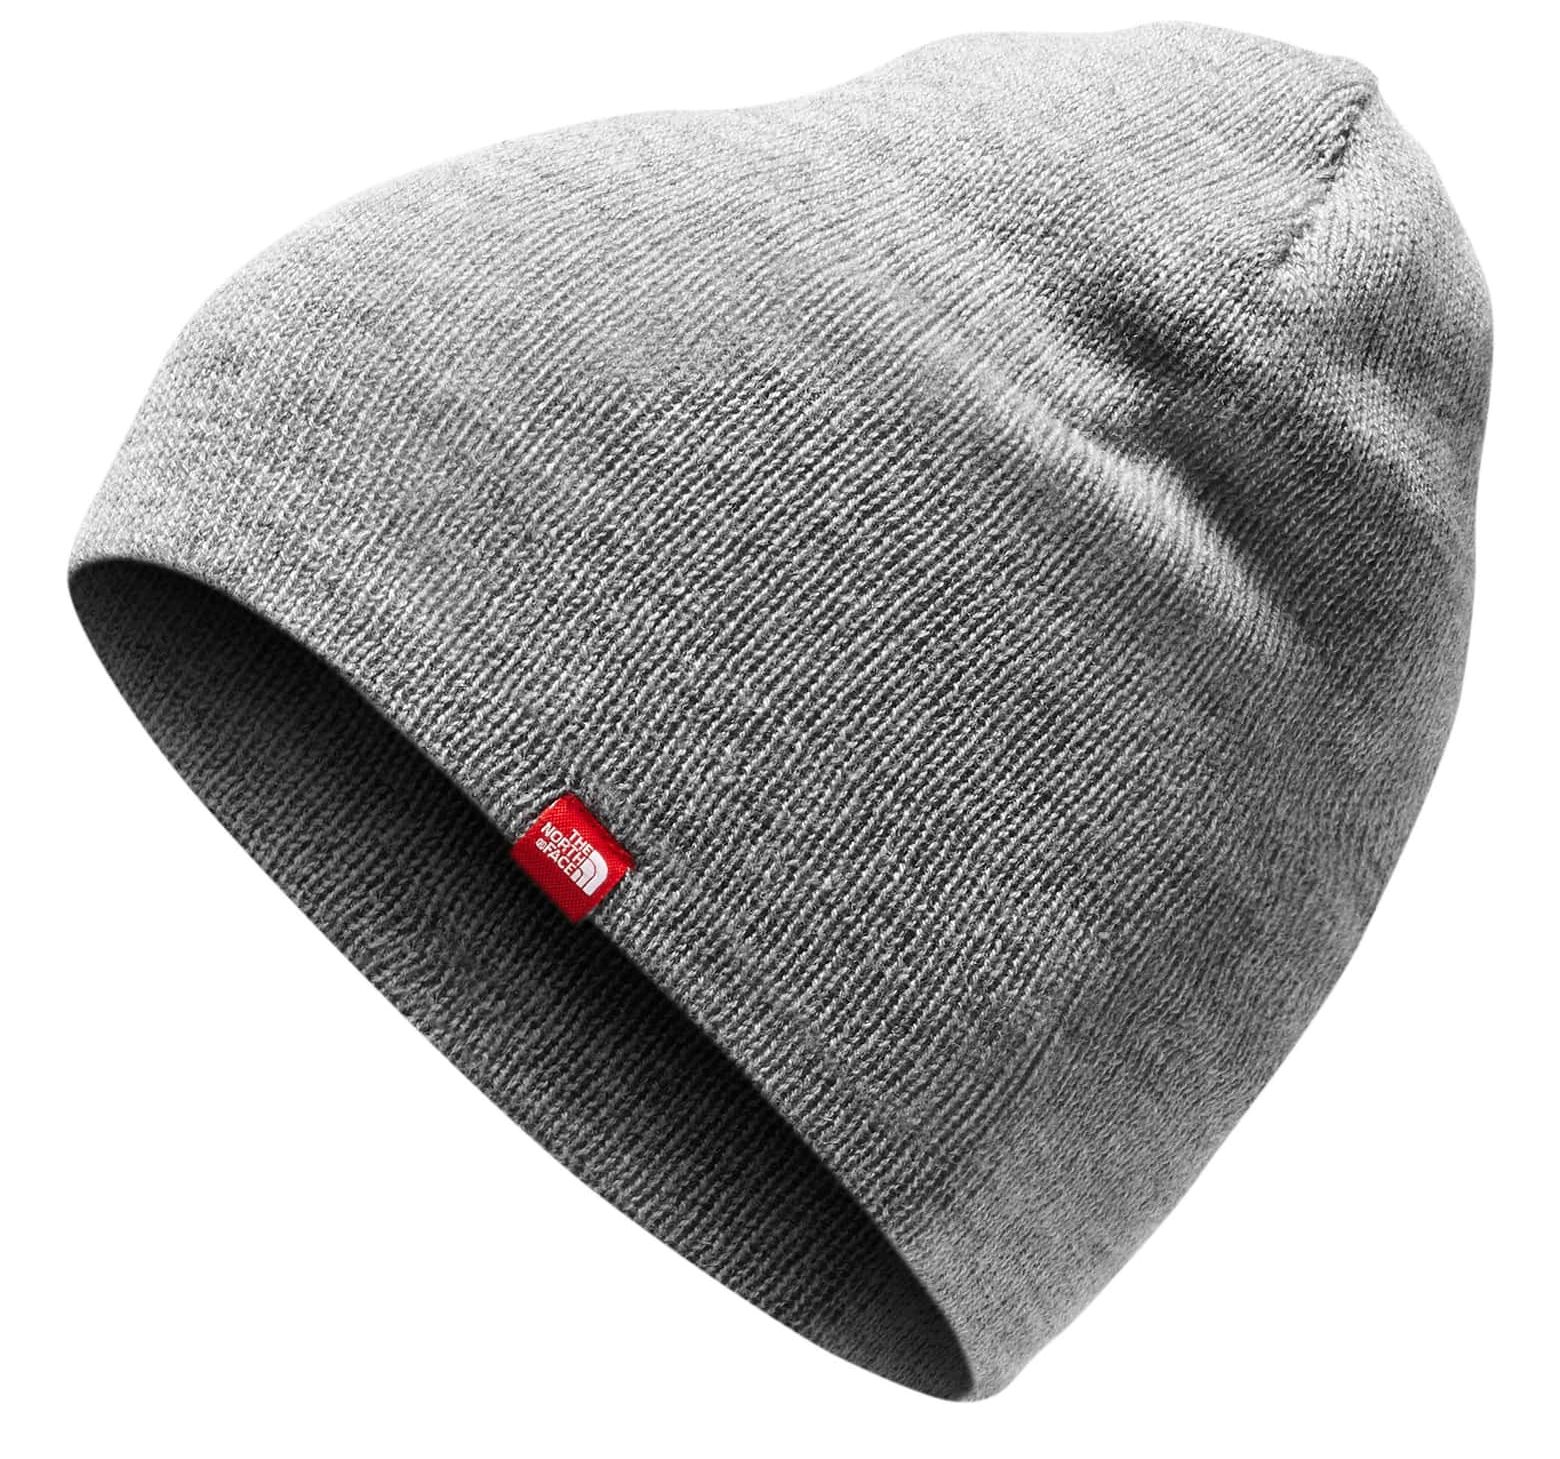 mens north face winter hat